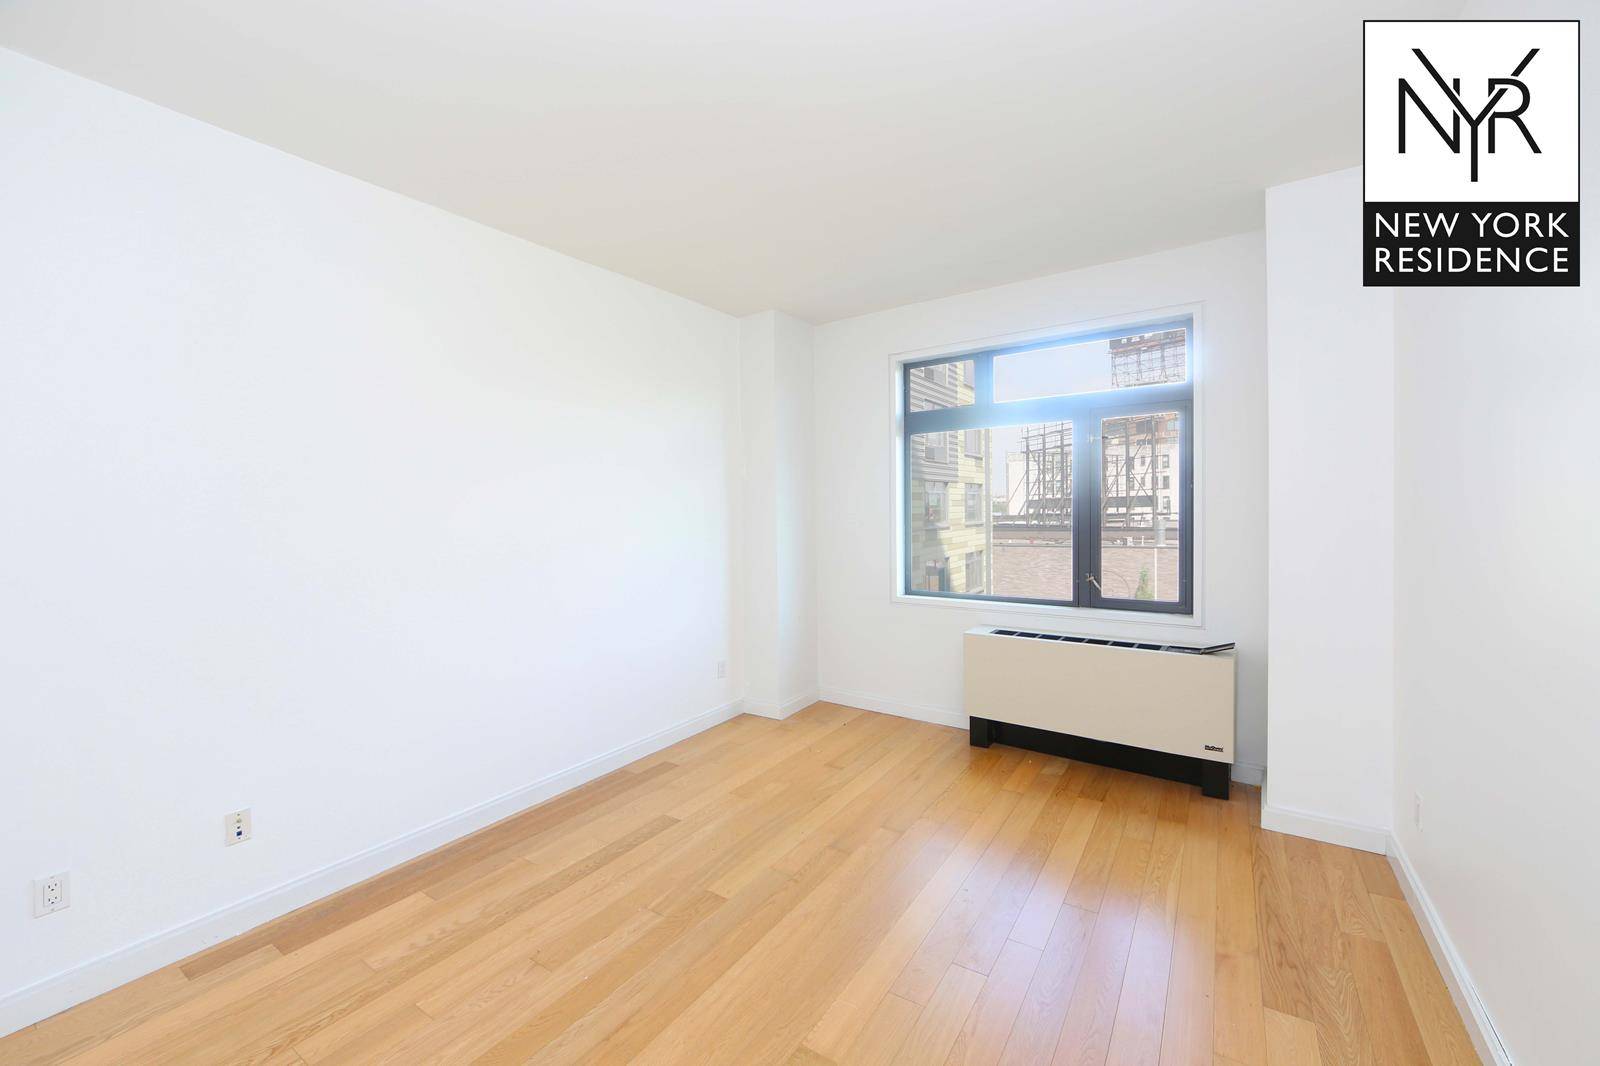 Immediately available. Spacious one bedroom at L Haus LIC is available for immediate move in.